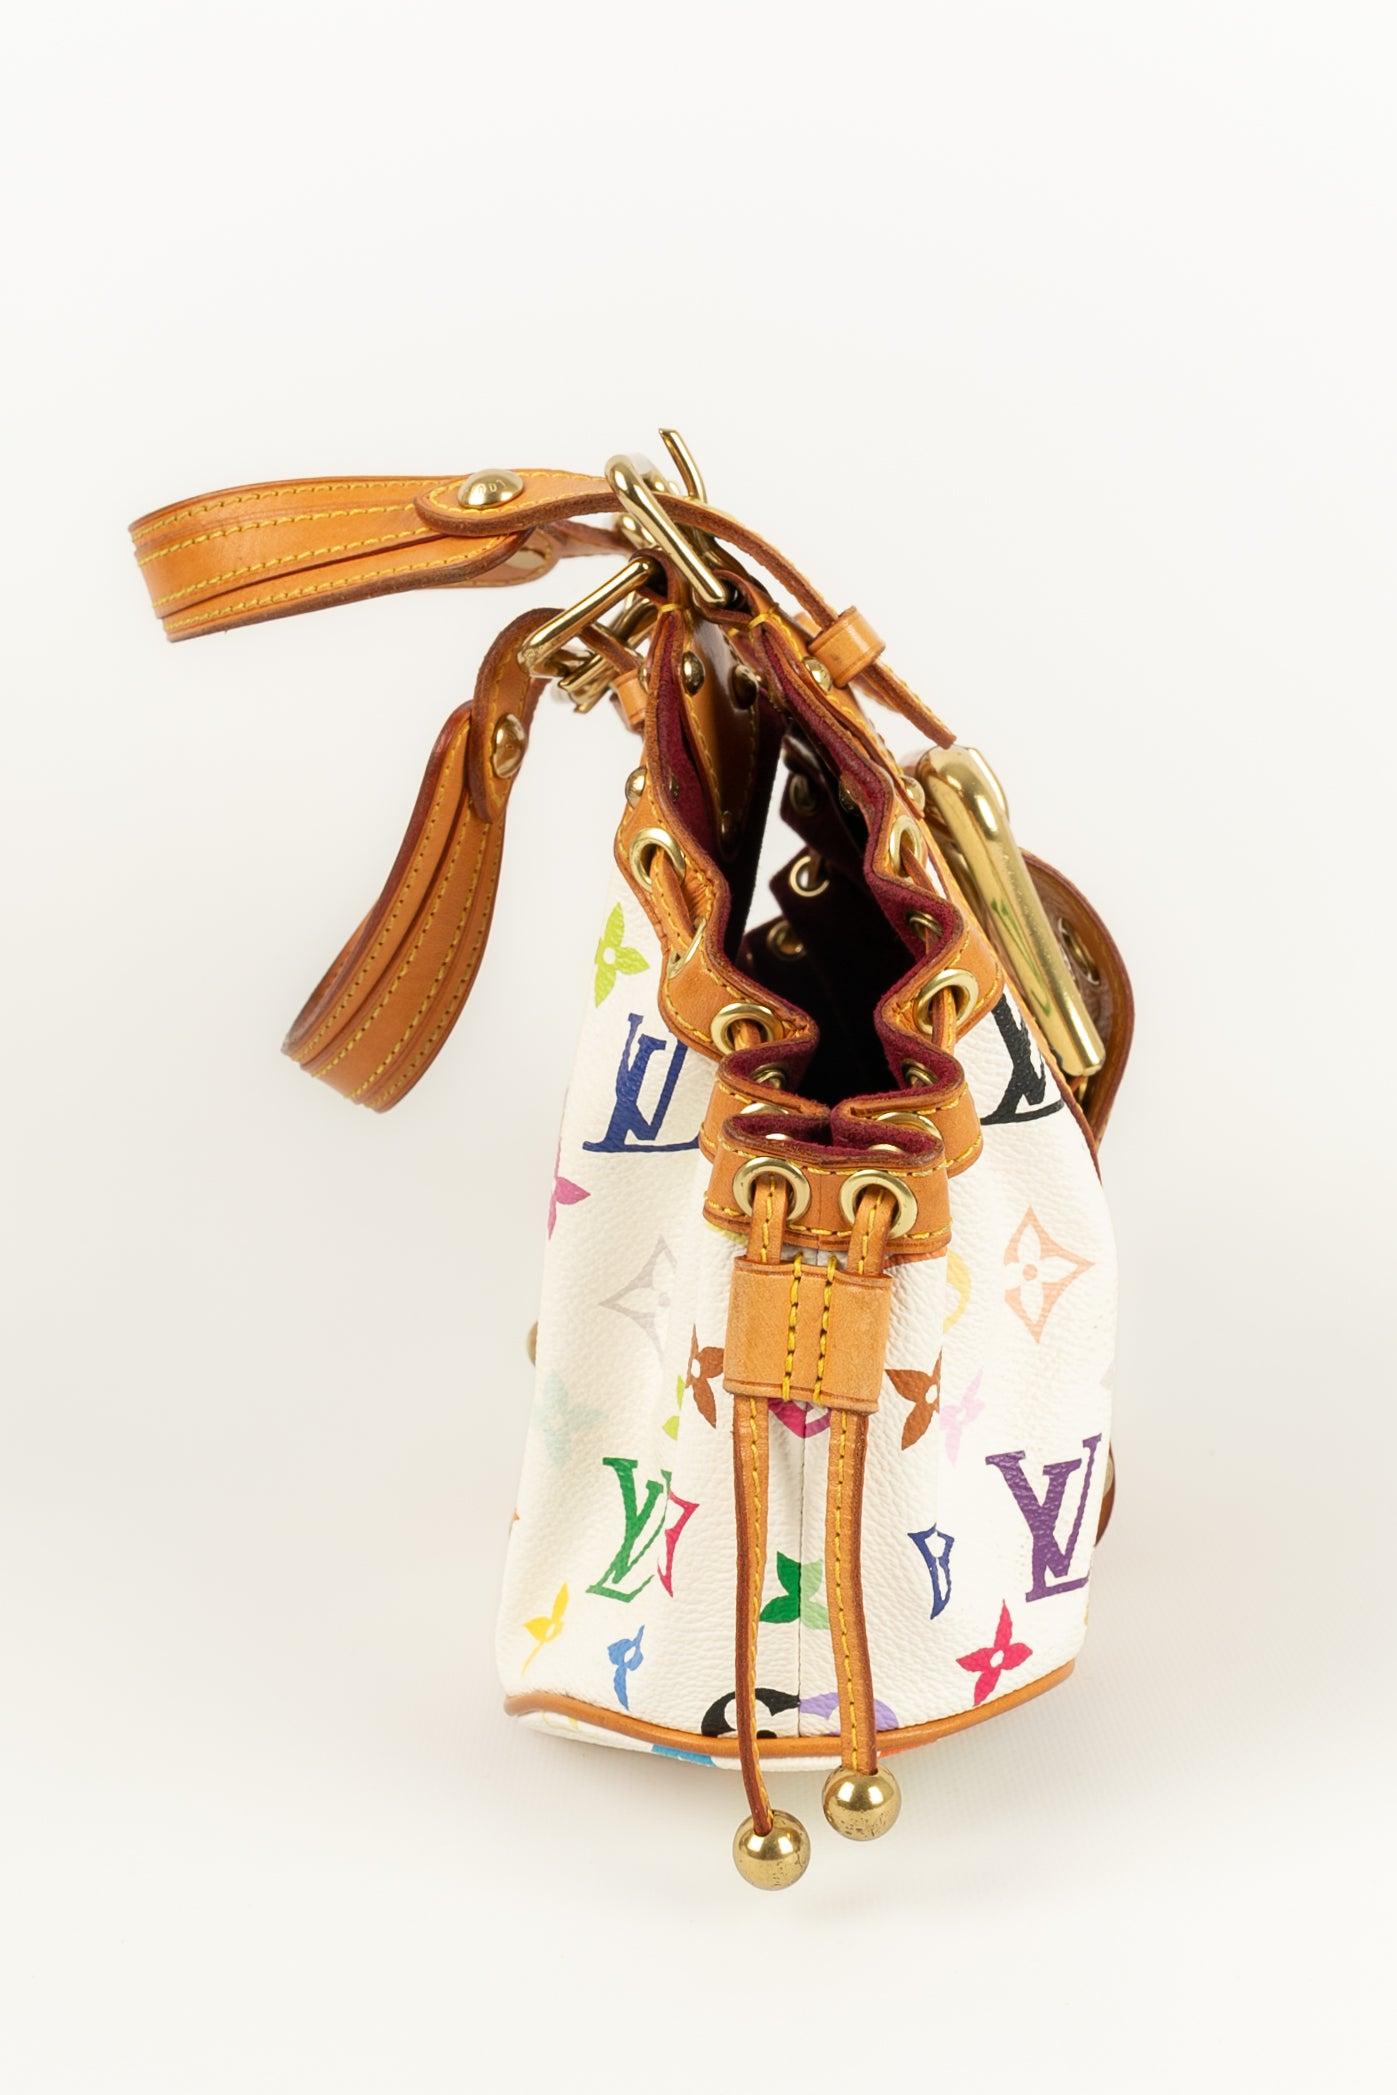 Louis Vuitton - Multicolored monogrammed leather bag on white background, Theda model. Golden metal attributes.

Additional information: 
Dimensions: Length: 28 cm, Height: 20 cm, Depth: 10 cm, Handle: 35 cm
Condition: Good condition
Seller Ref